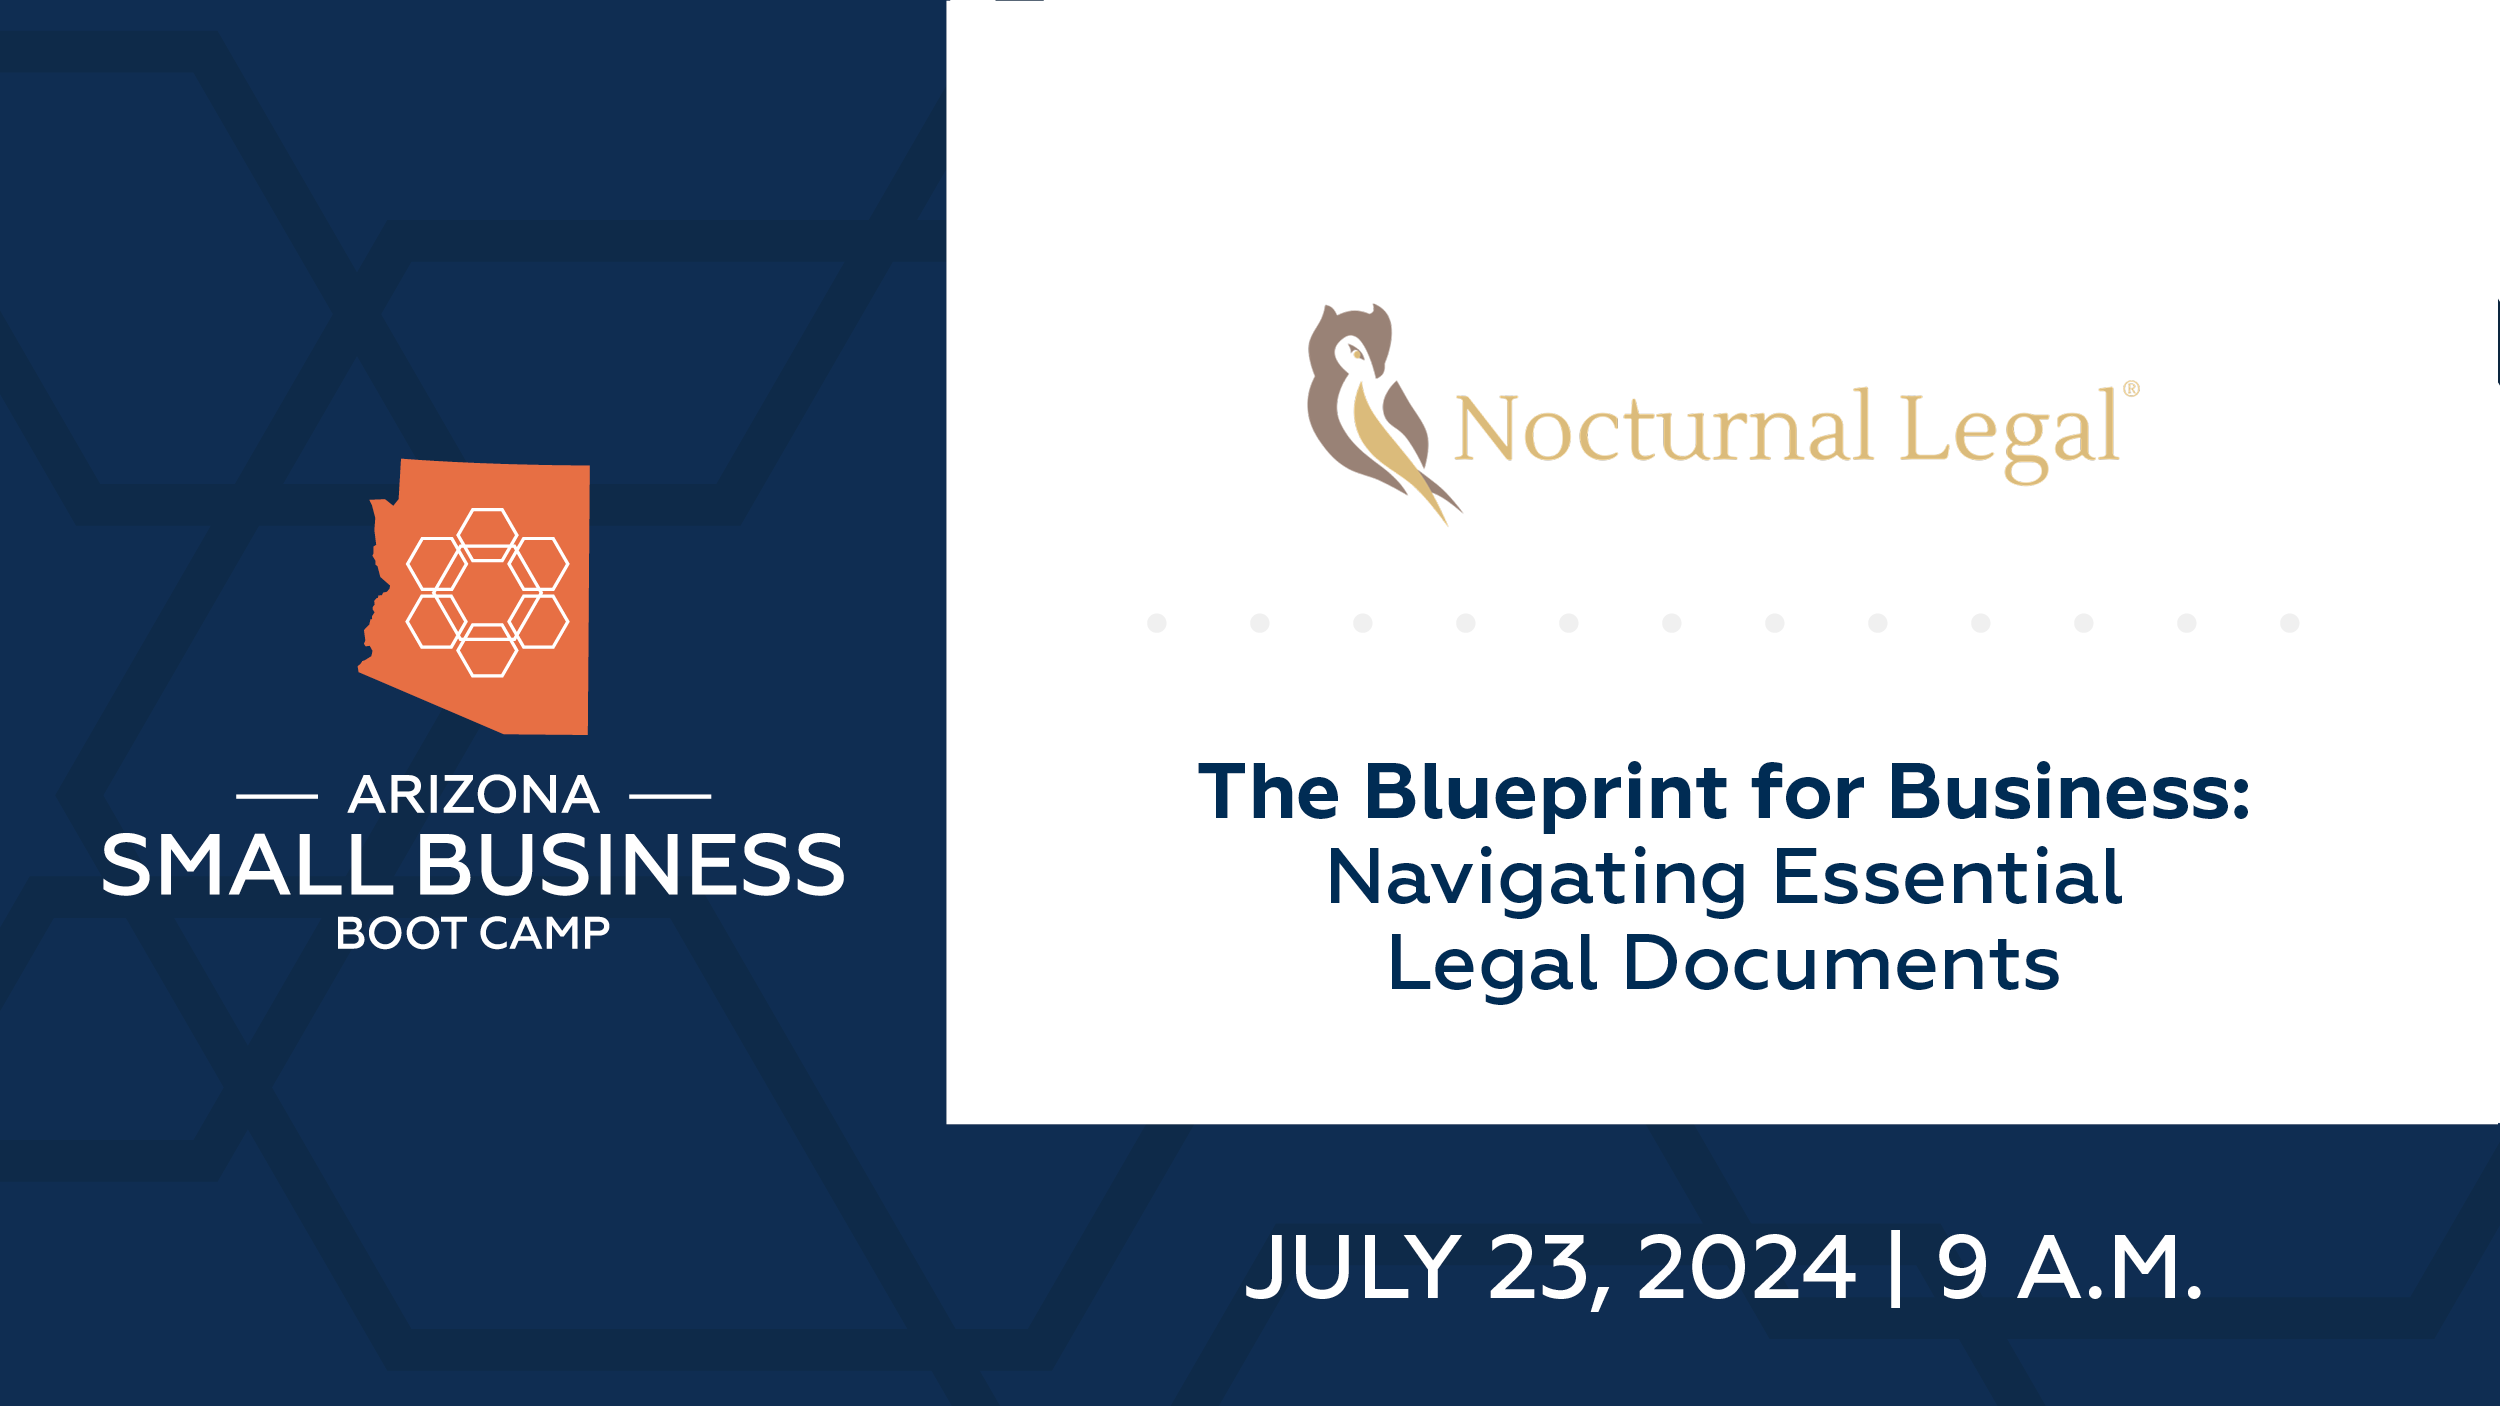 The Blueprint for Business: Navigating Essential Legal Documents